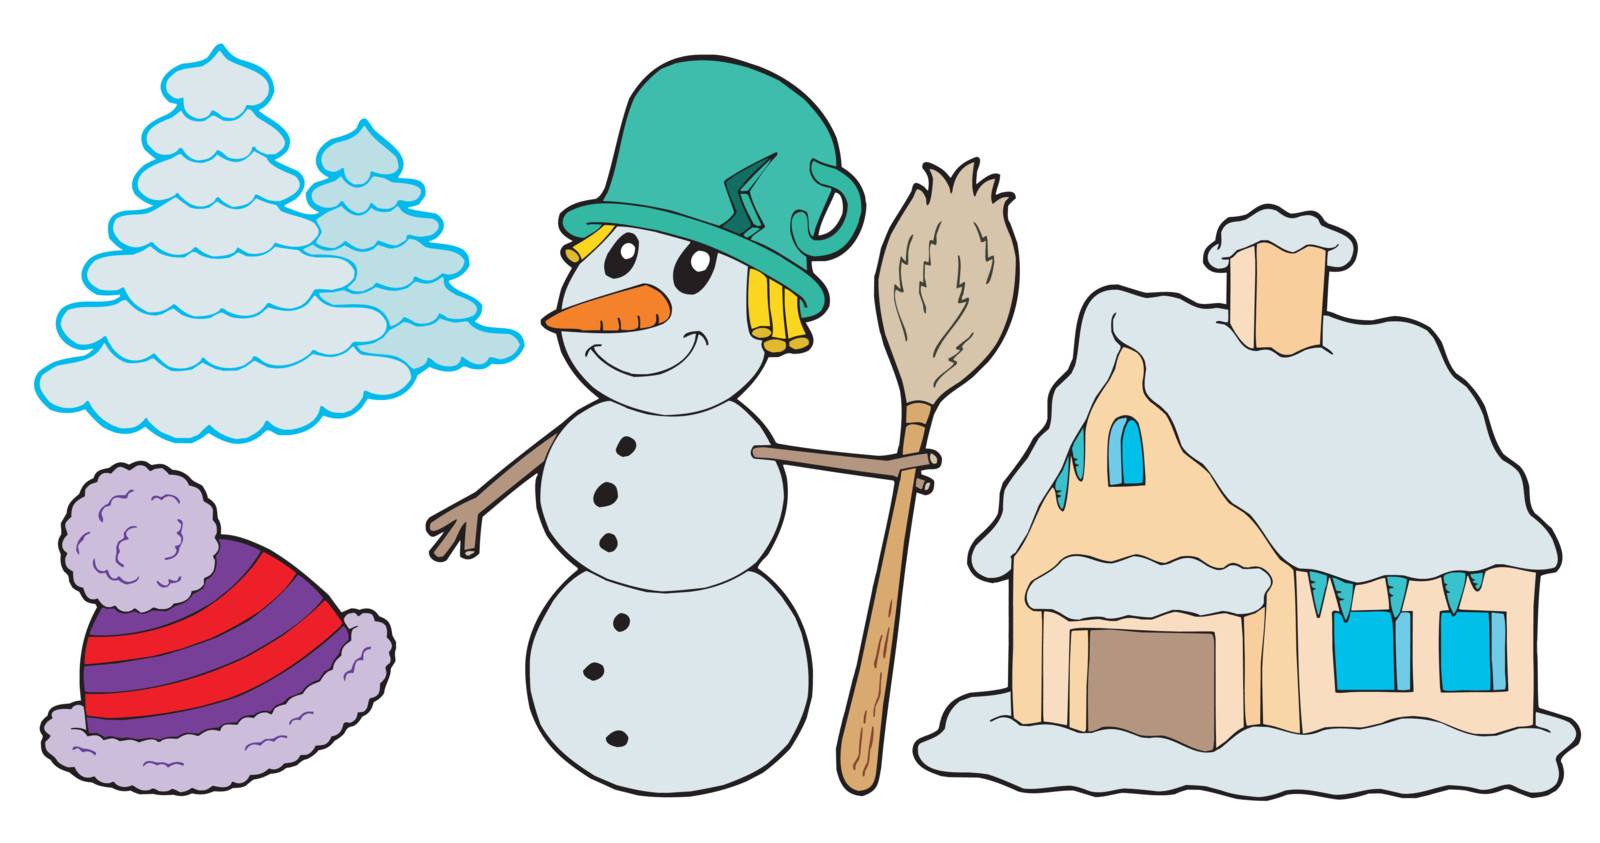 Winter collection on white background - vector illustration.